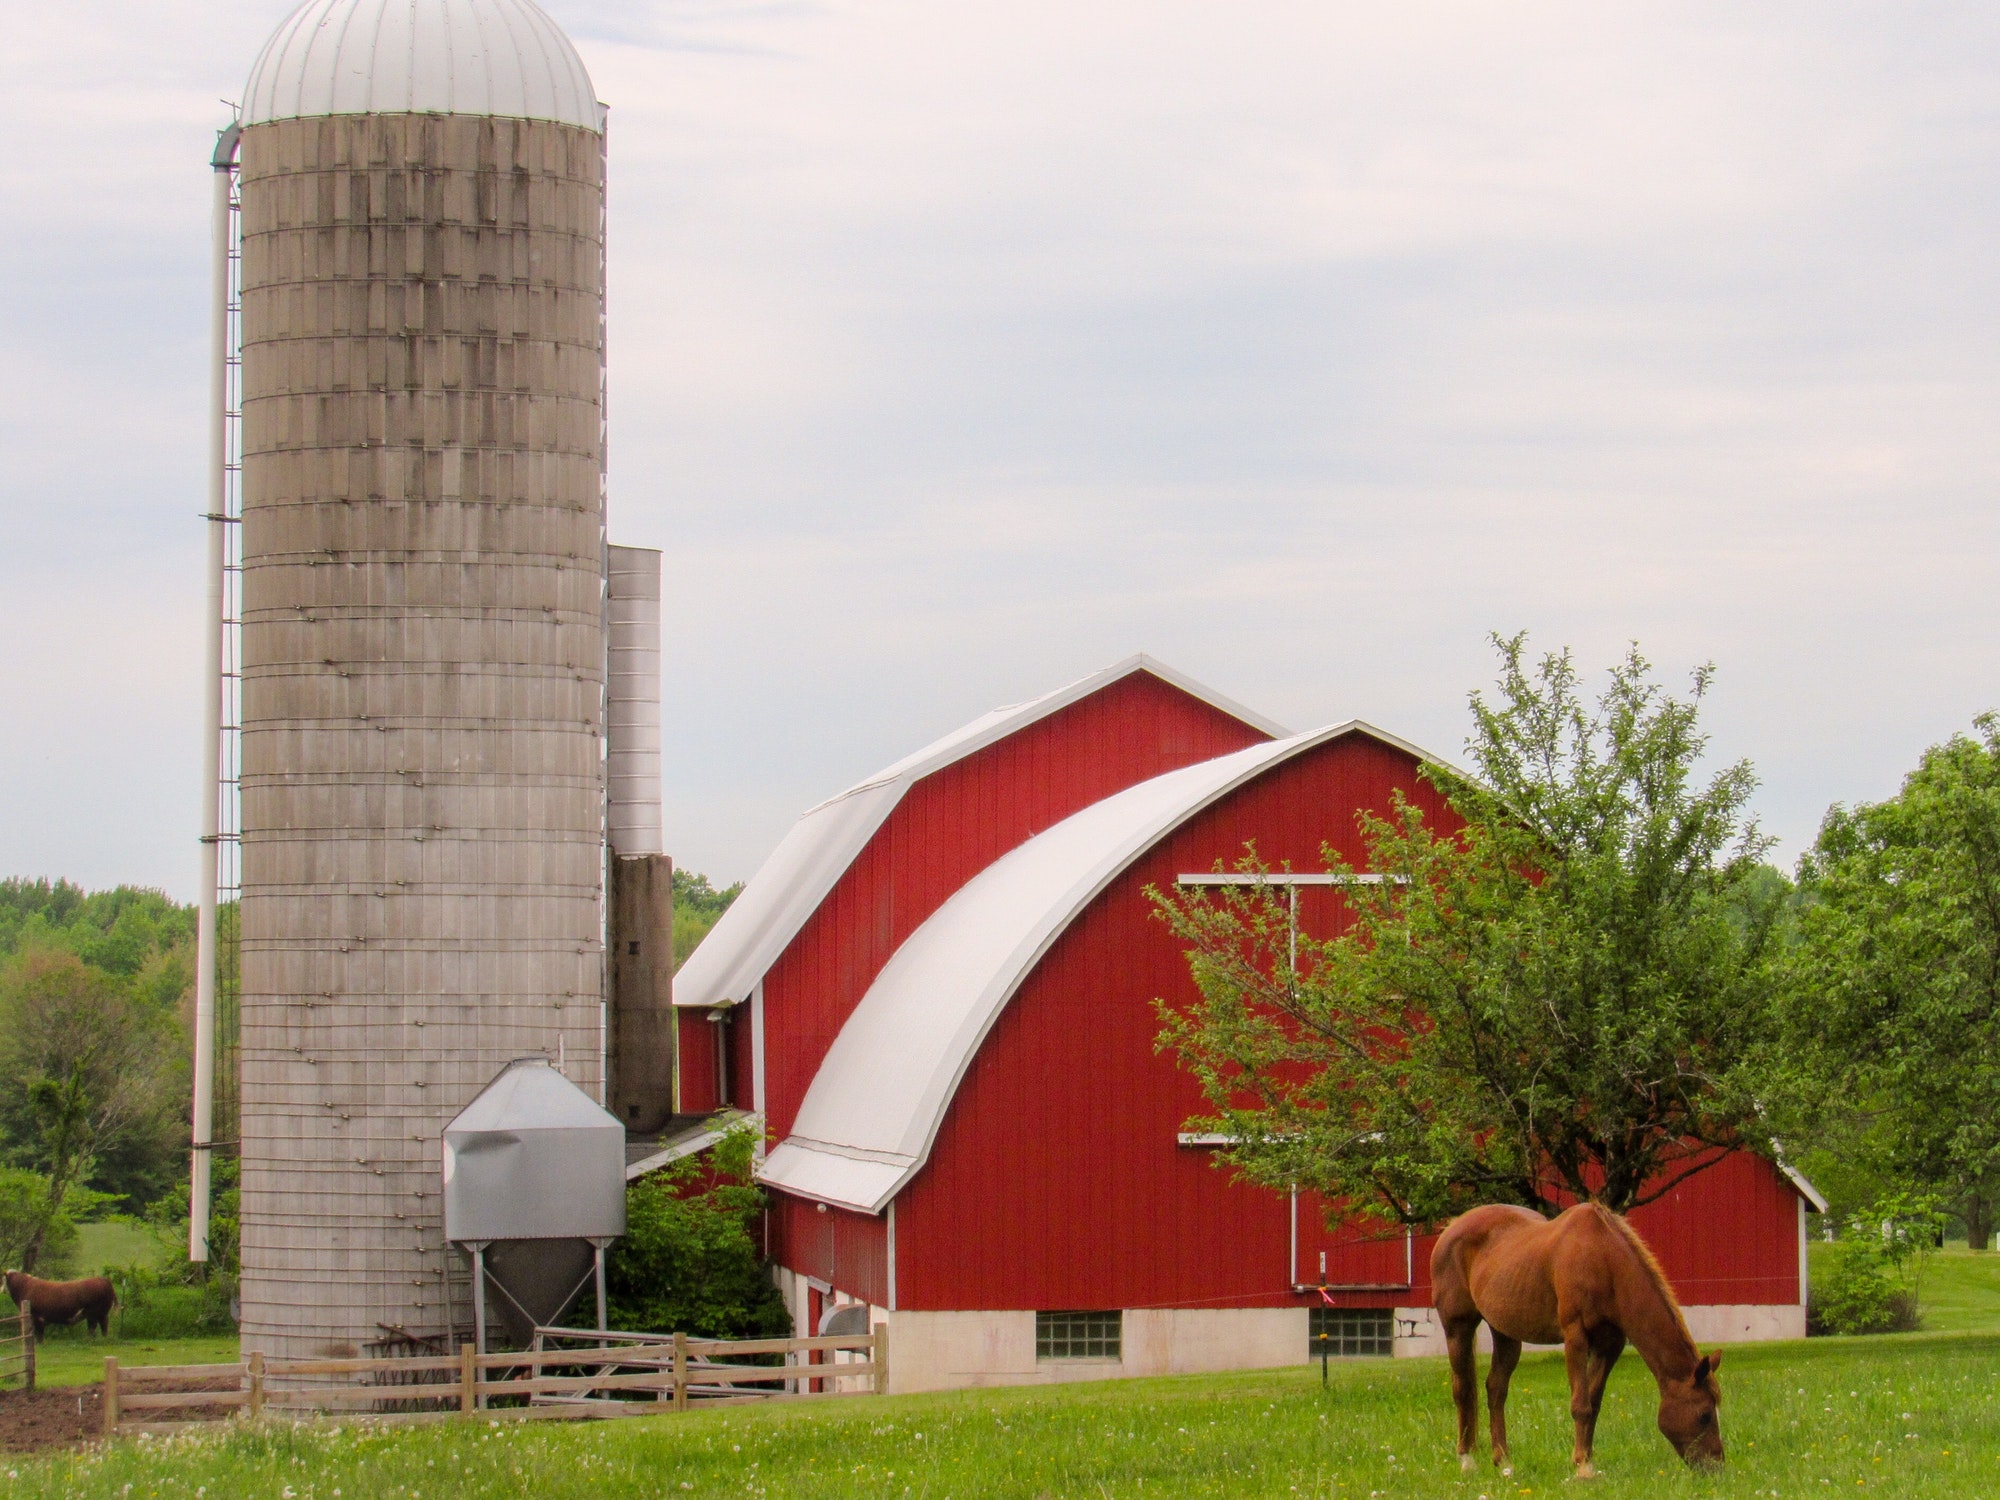 A horse is eating grass in front of a red barn and cement silos.